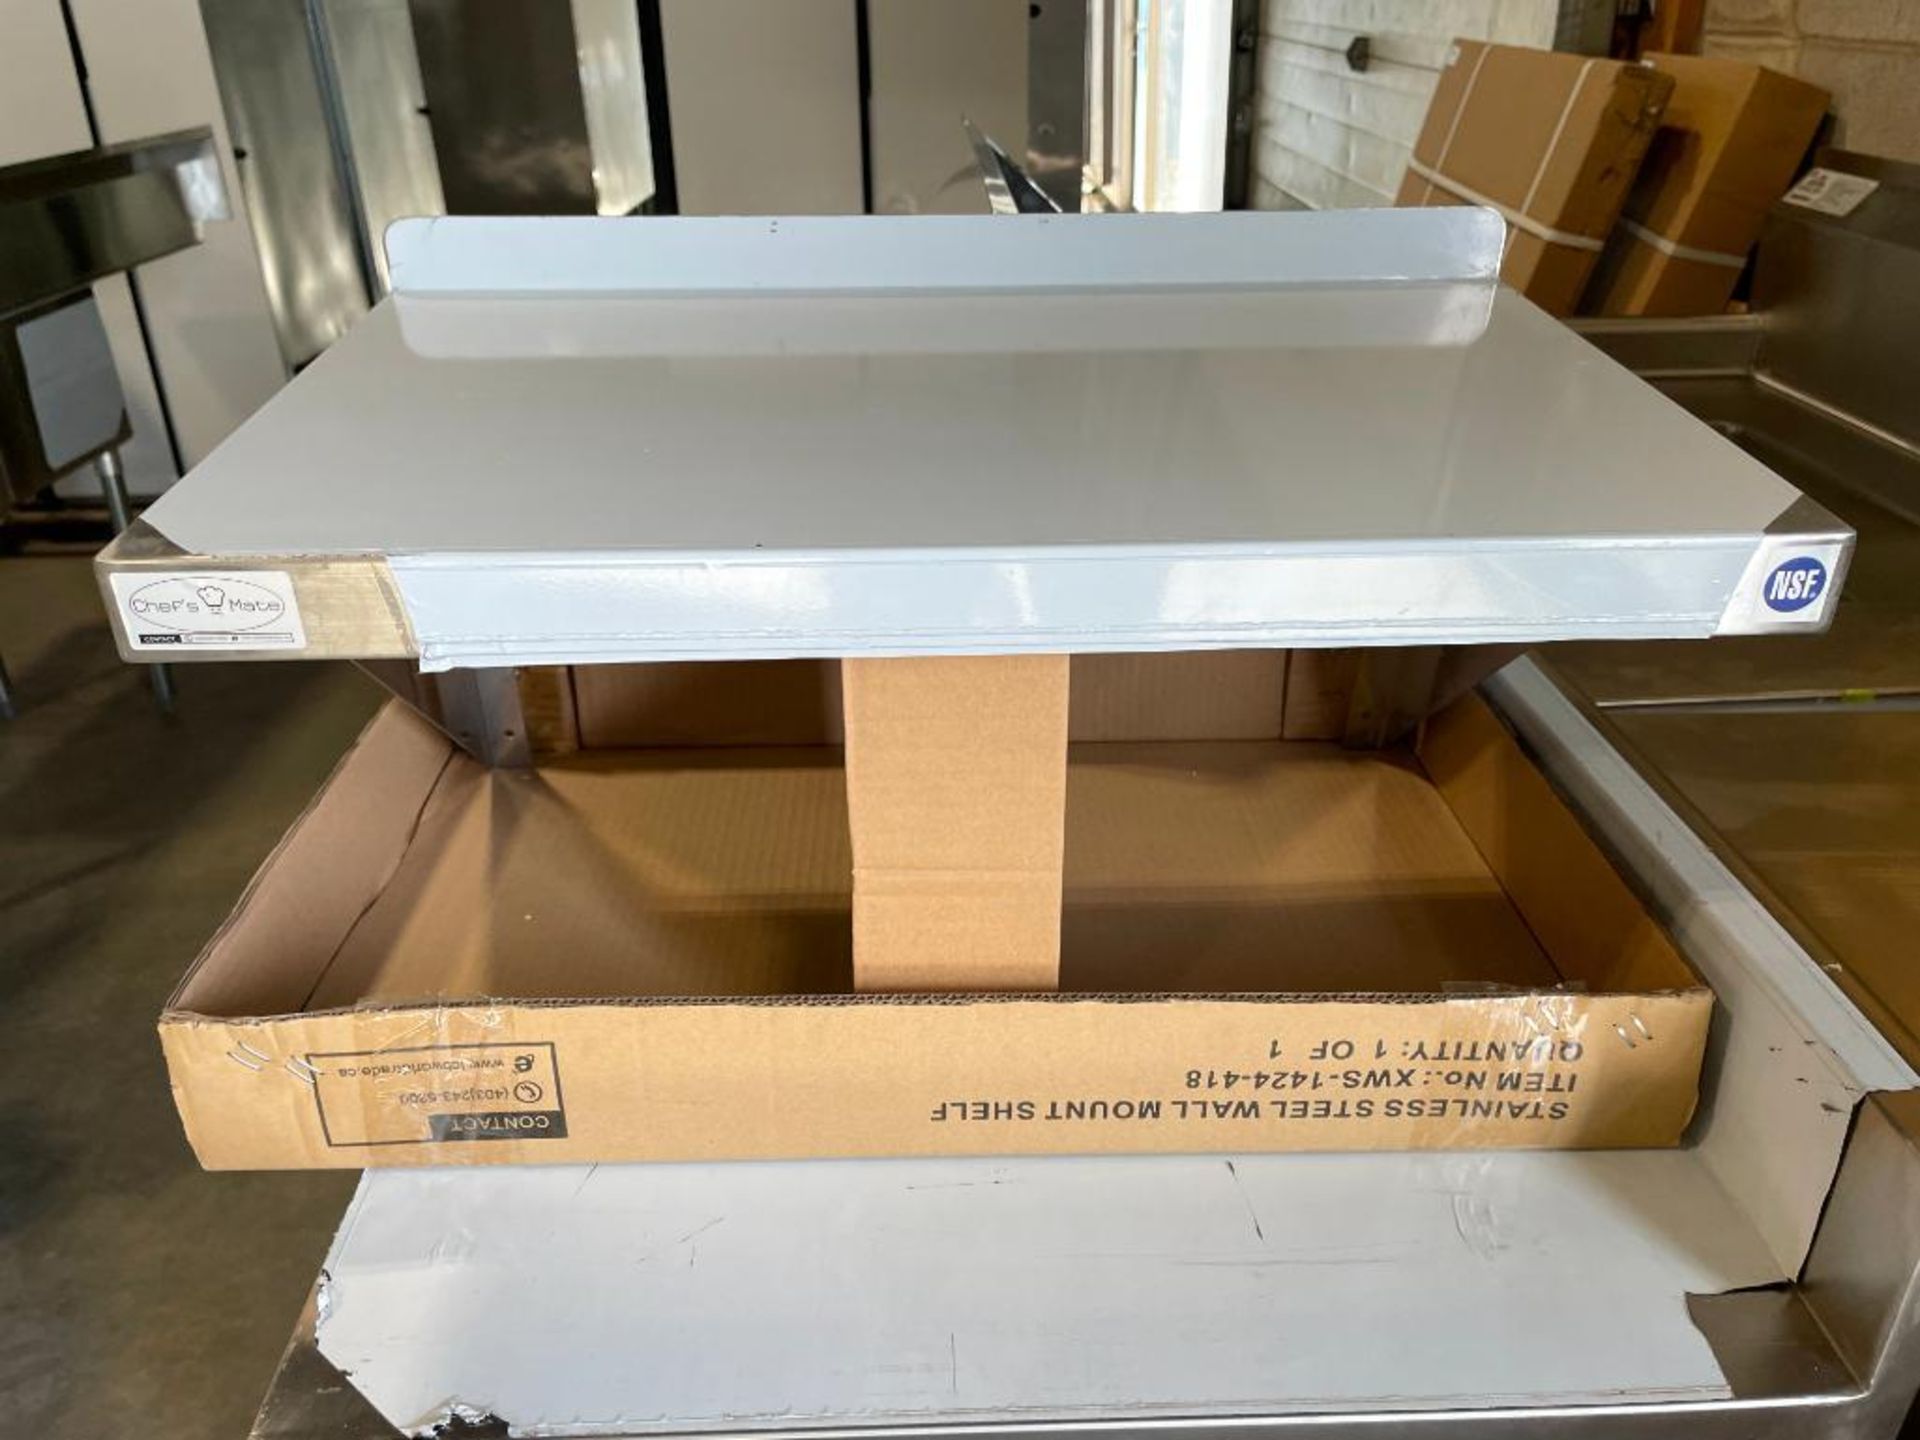 CHEF’S MATE 24” X 14” STAINLESS STEEL WALL SHELF - NEW - Image 2 of 8